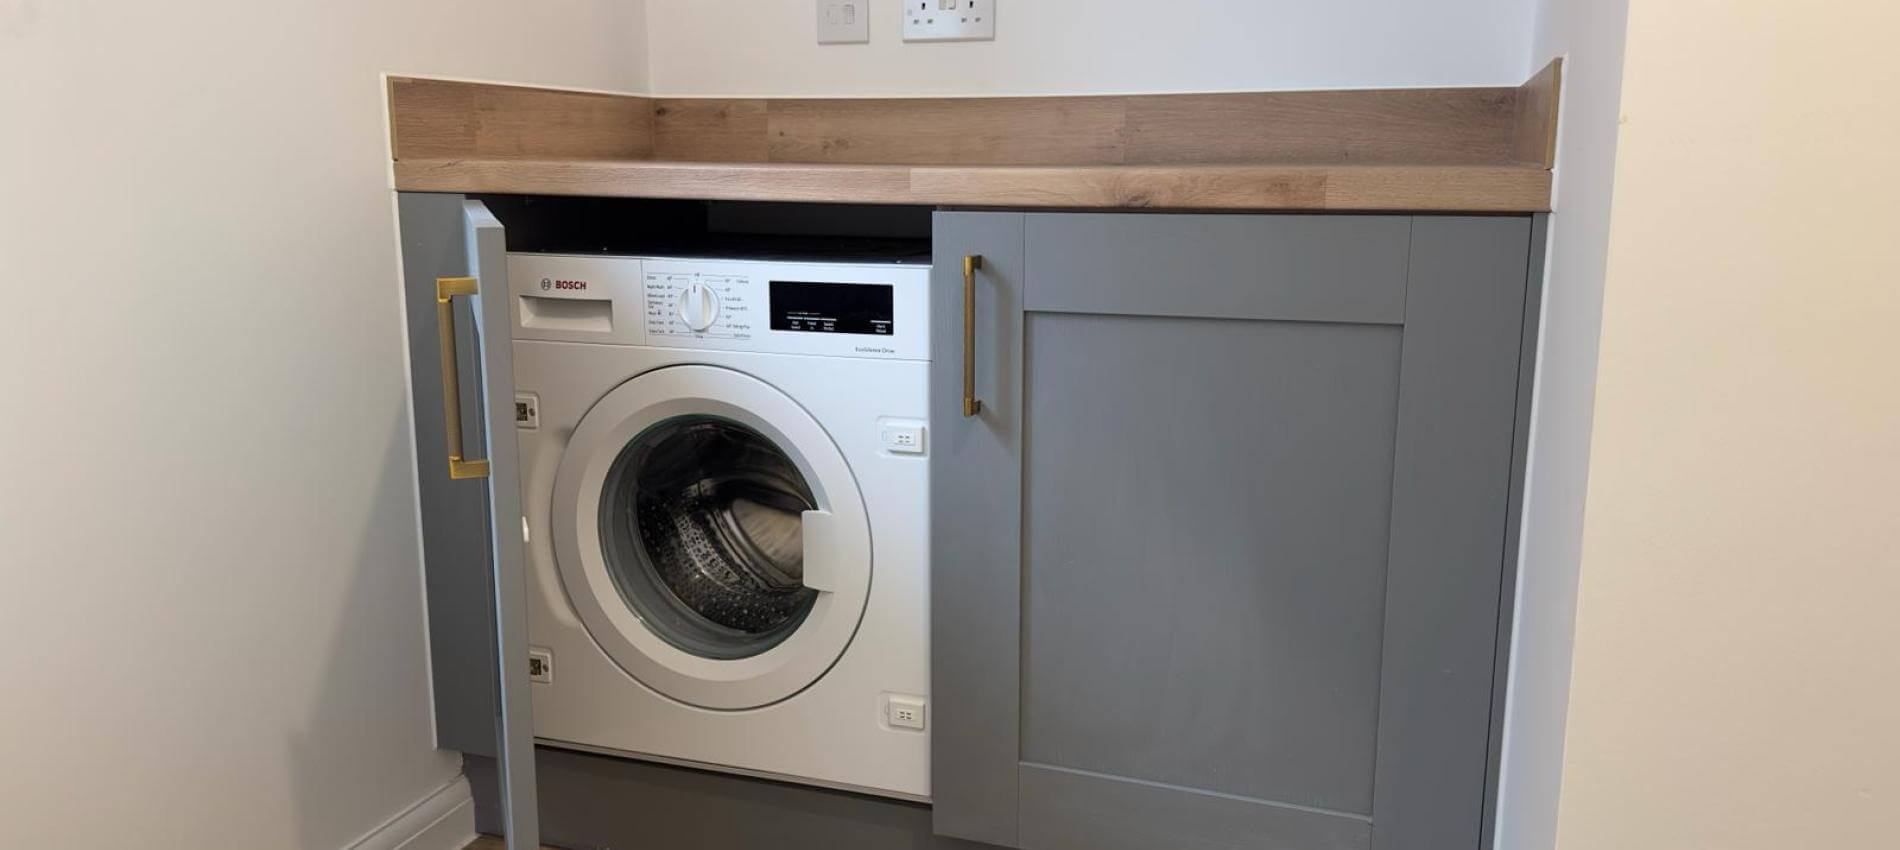 Utility Room with Integrated Washing Machine at The Spruce.